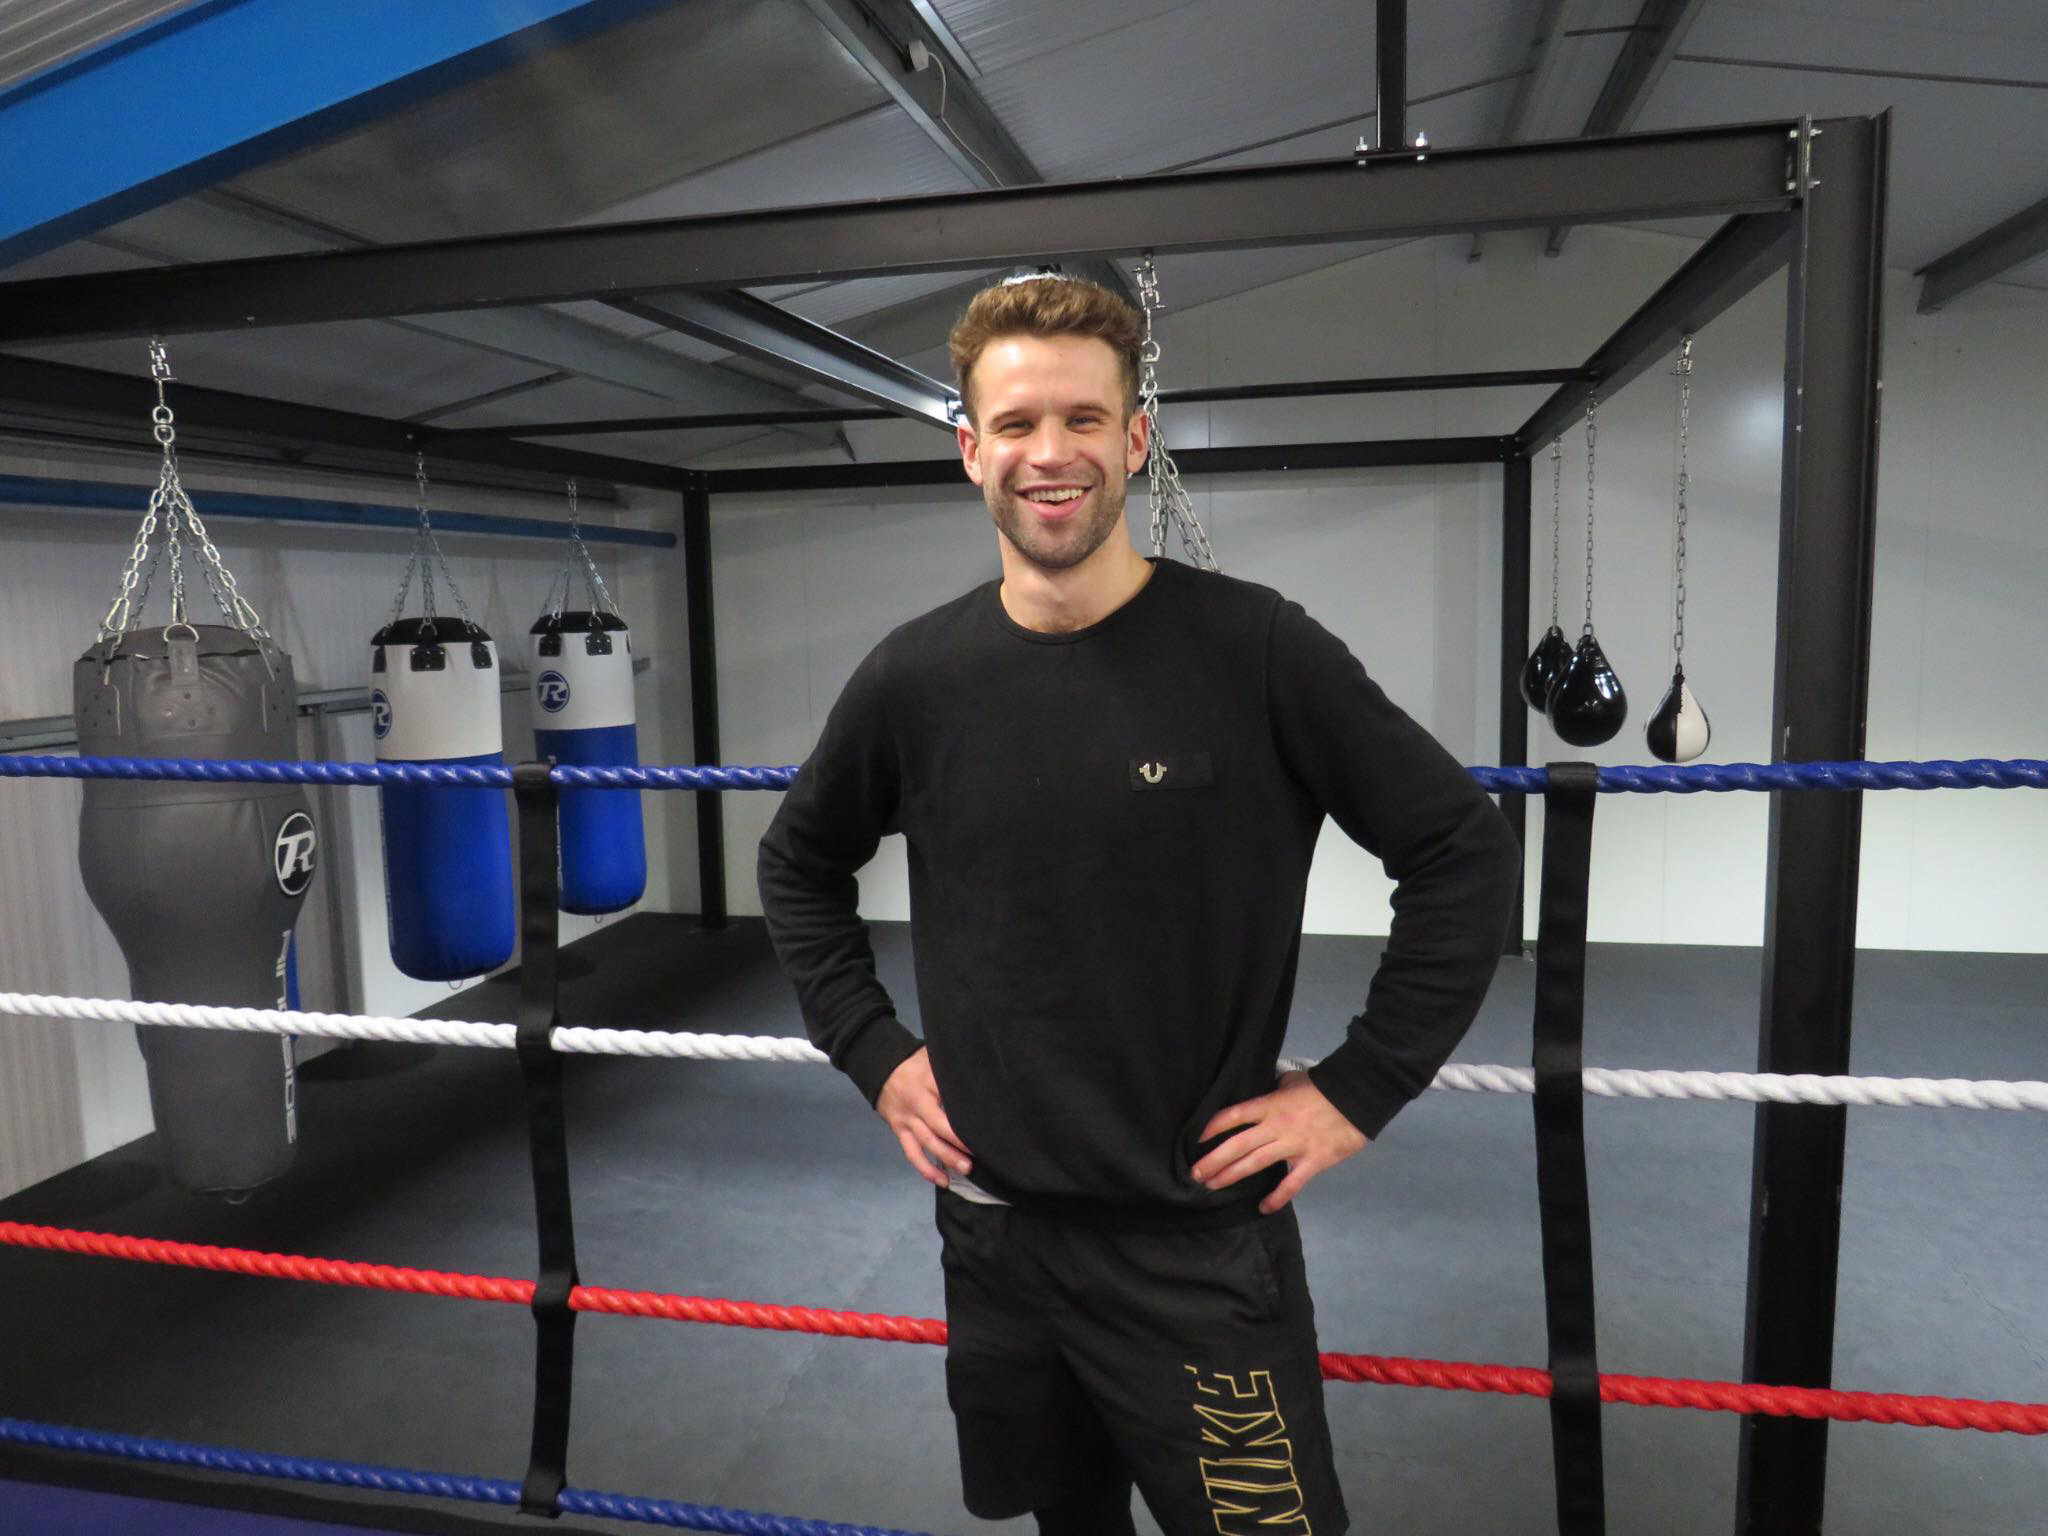 BOXING | From ballet dancer to professional boxer – The rise of Liam O’hare